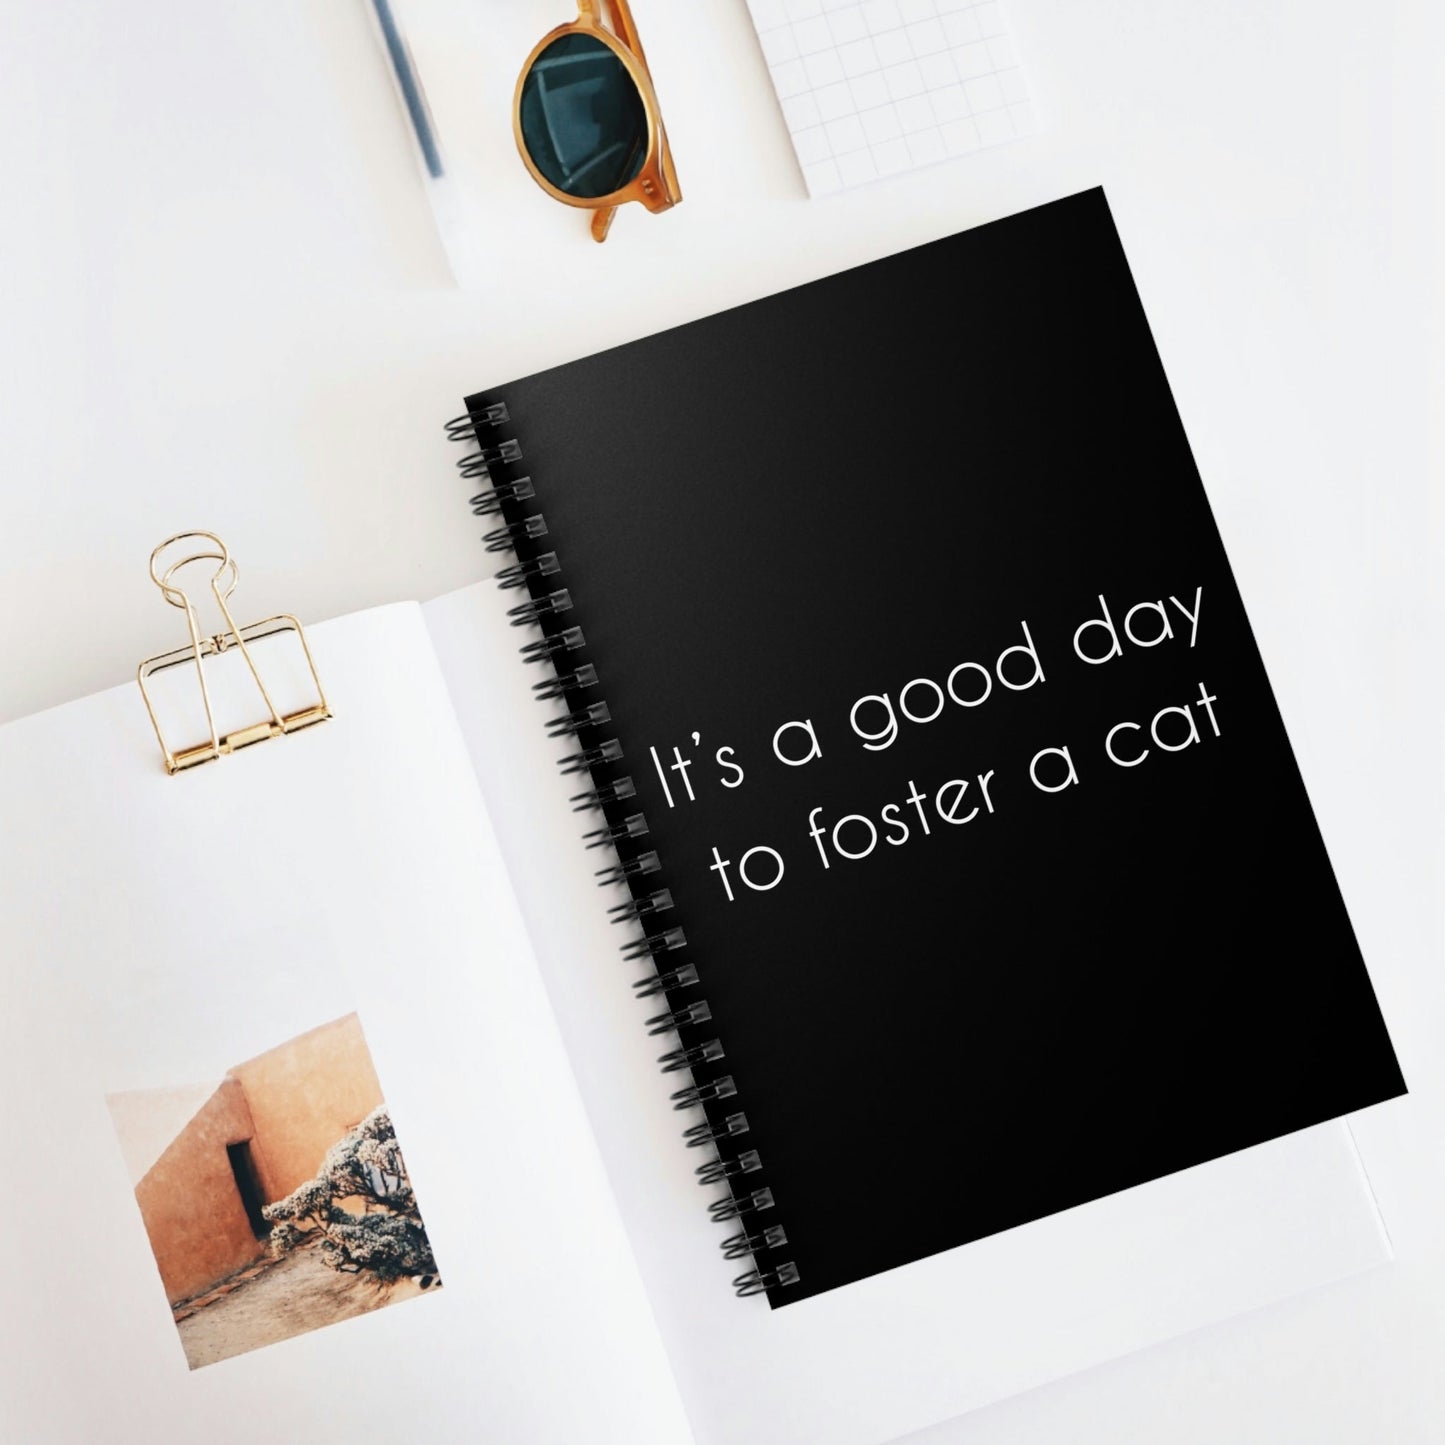 It's A Good Day To Foster A Cat | Notebook - Detezi Designs-46354677243436018438